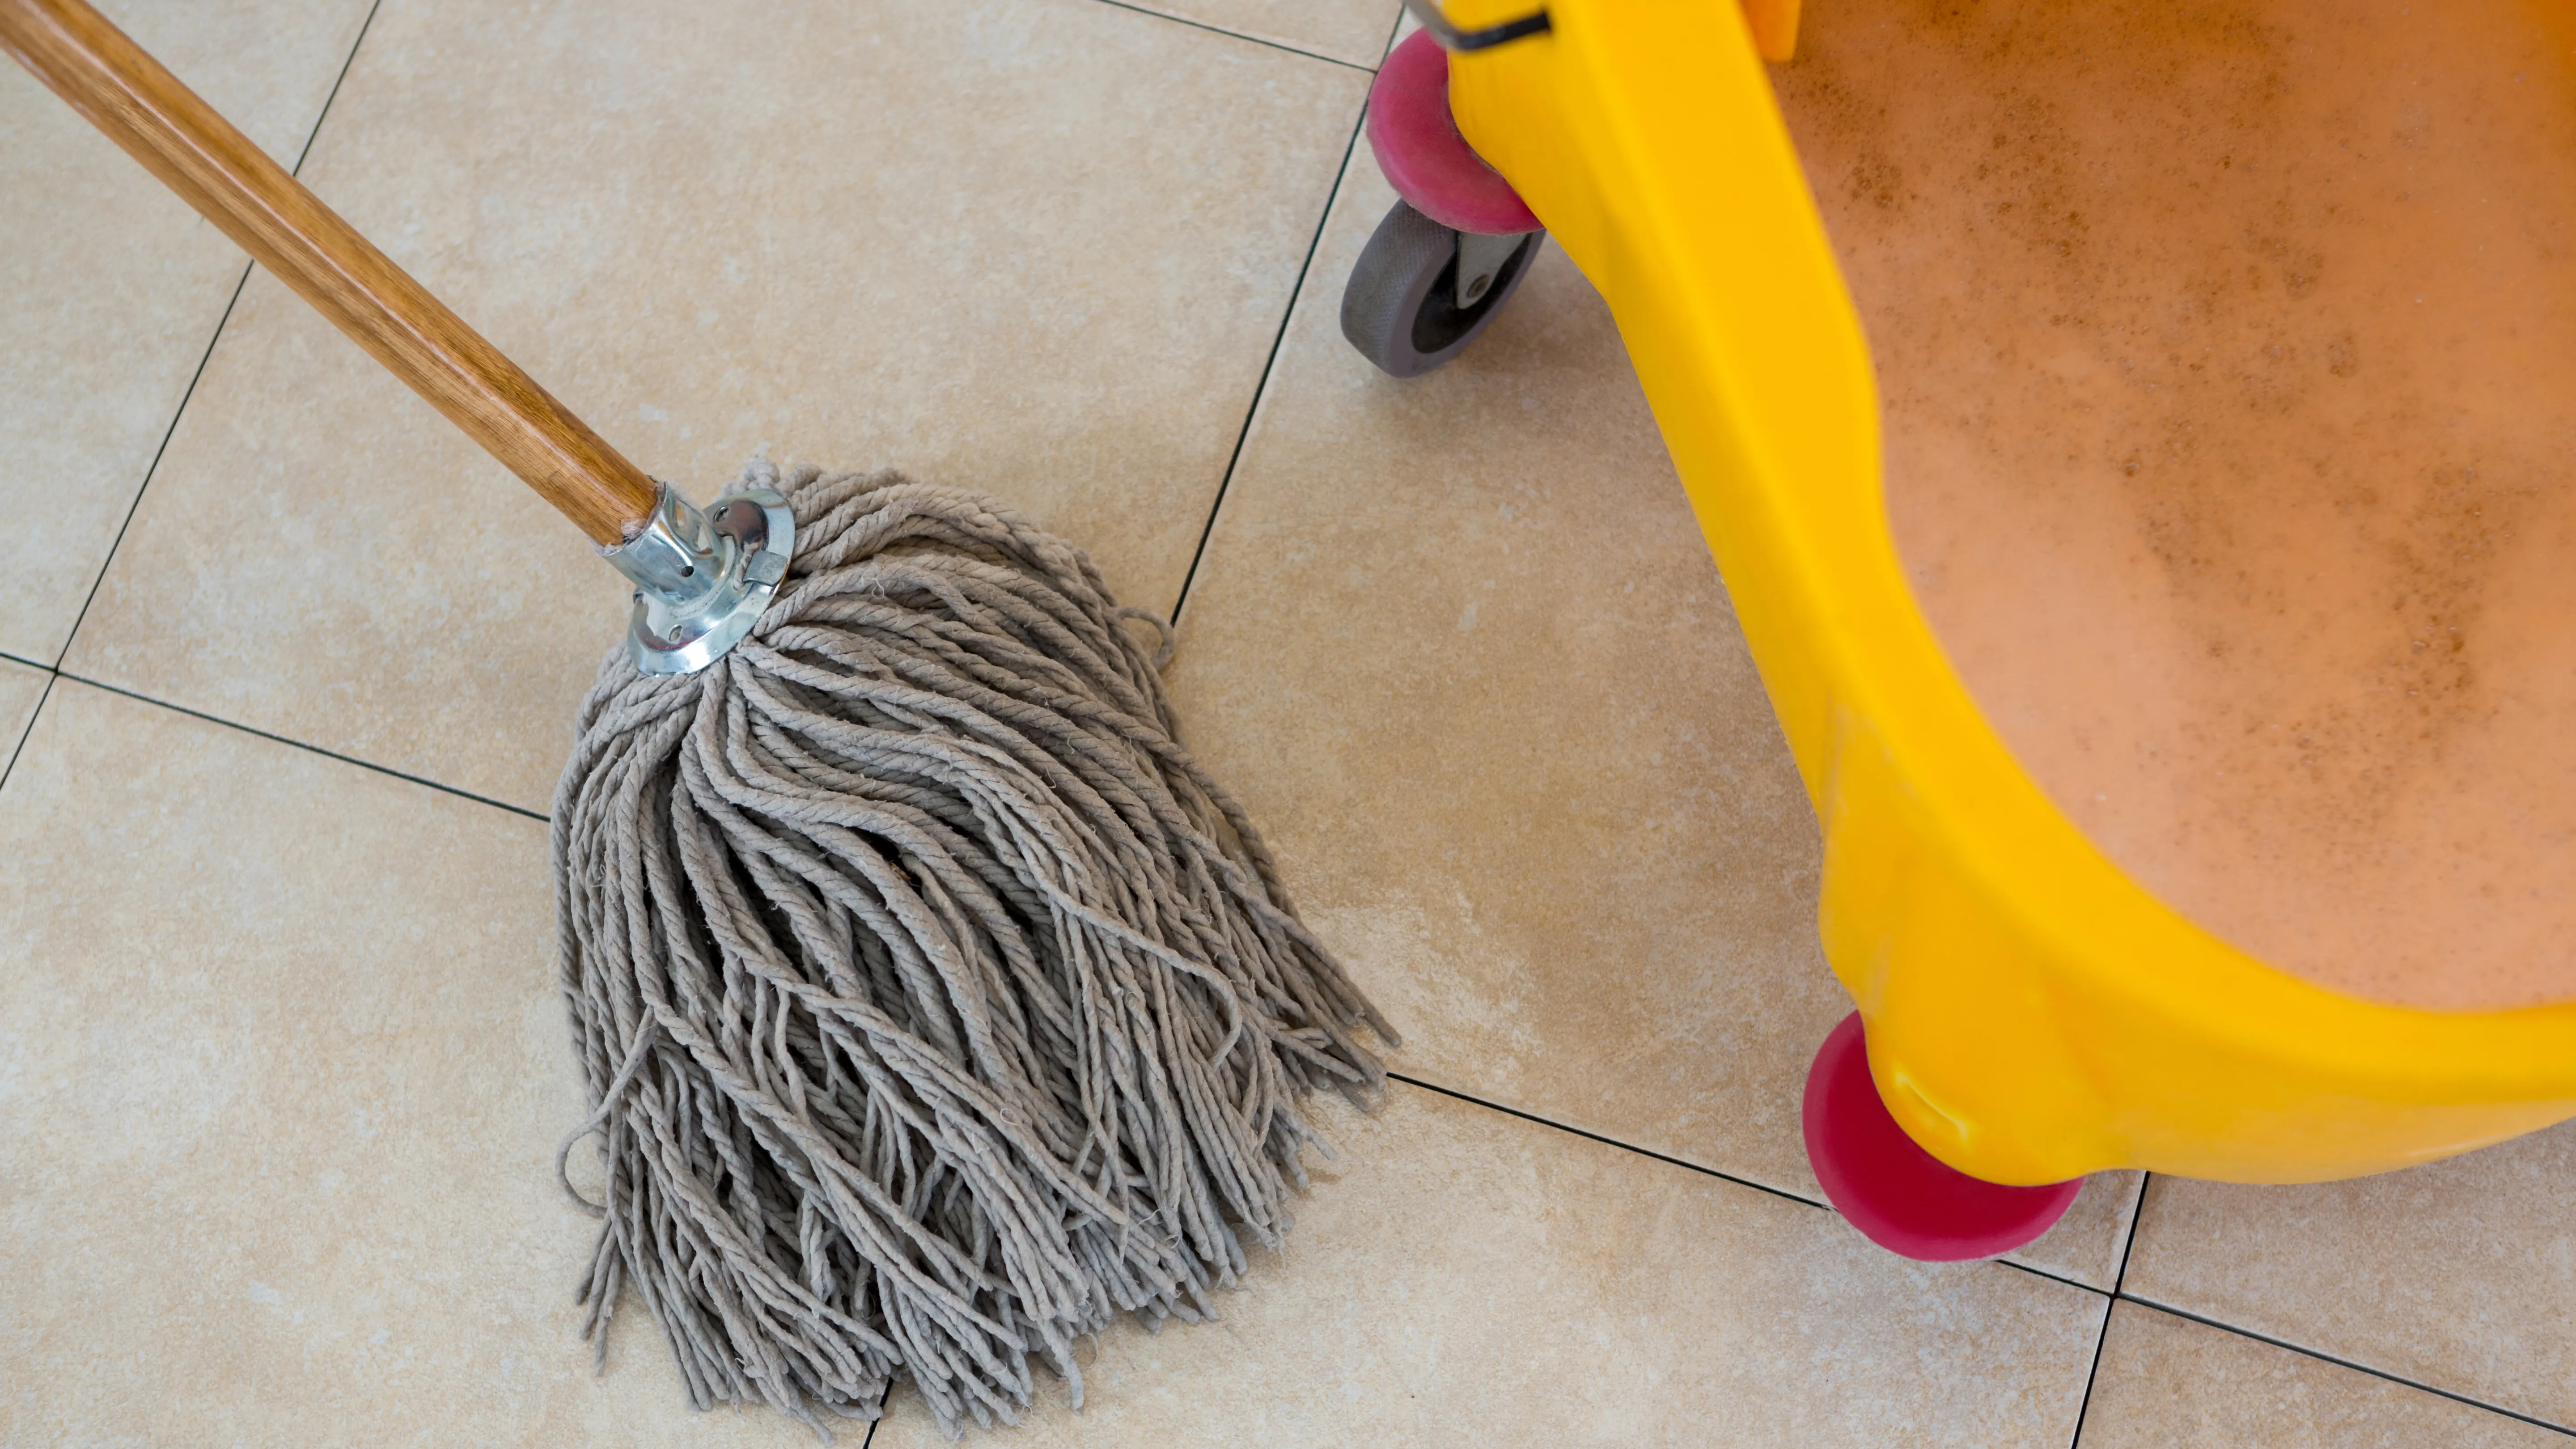 How to Clean Tile Floors According to Experts